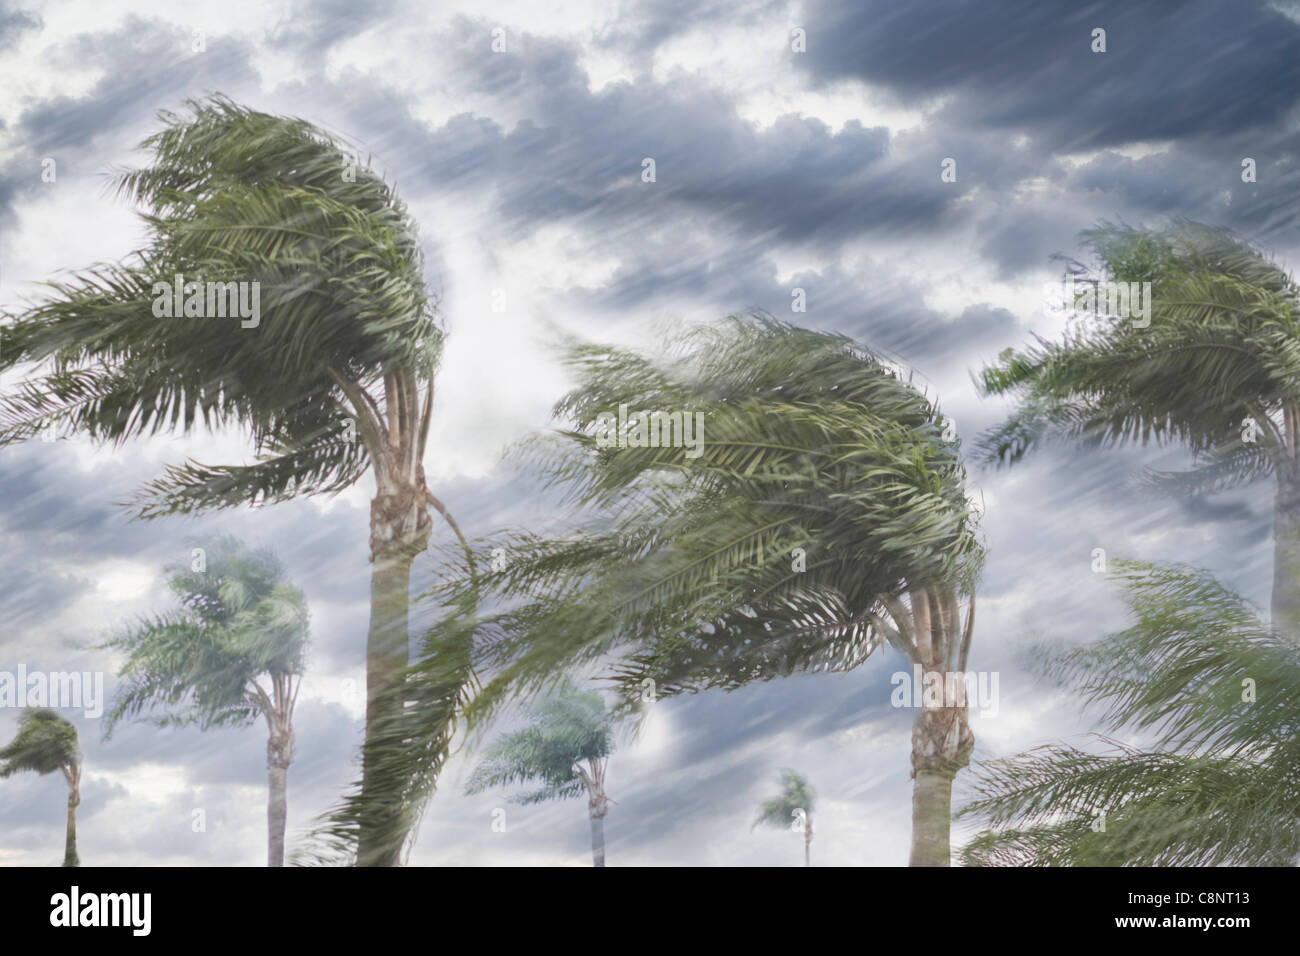 Rain and storm winds blowing trees Stock Photo